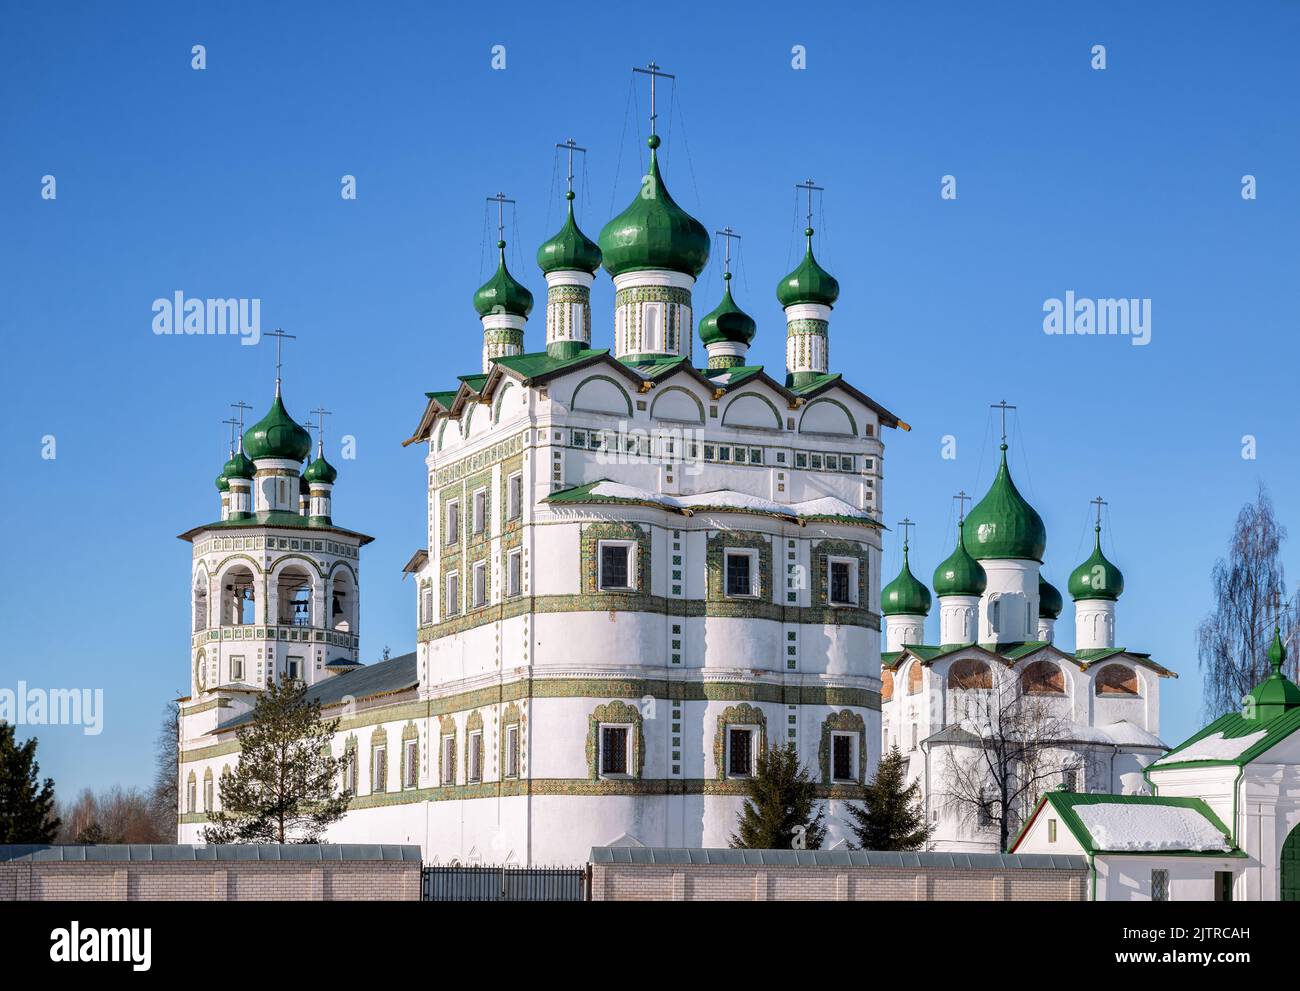 Vyazhishchi Convent of St. Nicholas in Velikiy Novgorod vicinity, Russia. Temples of the monastery decorated with ceramic tiles Stock Photo